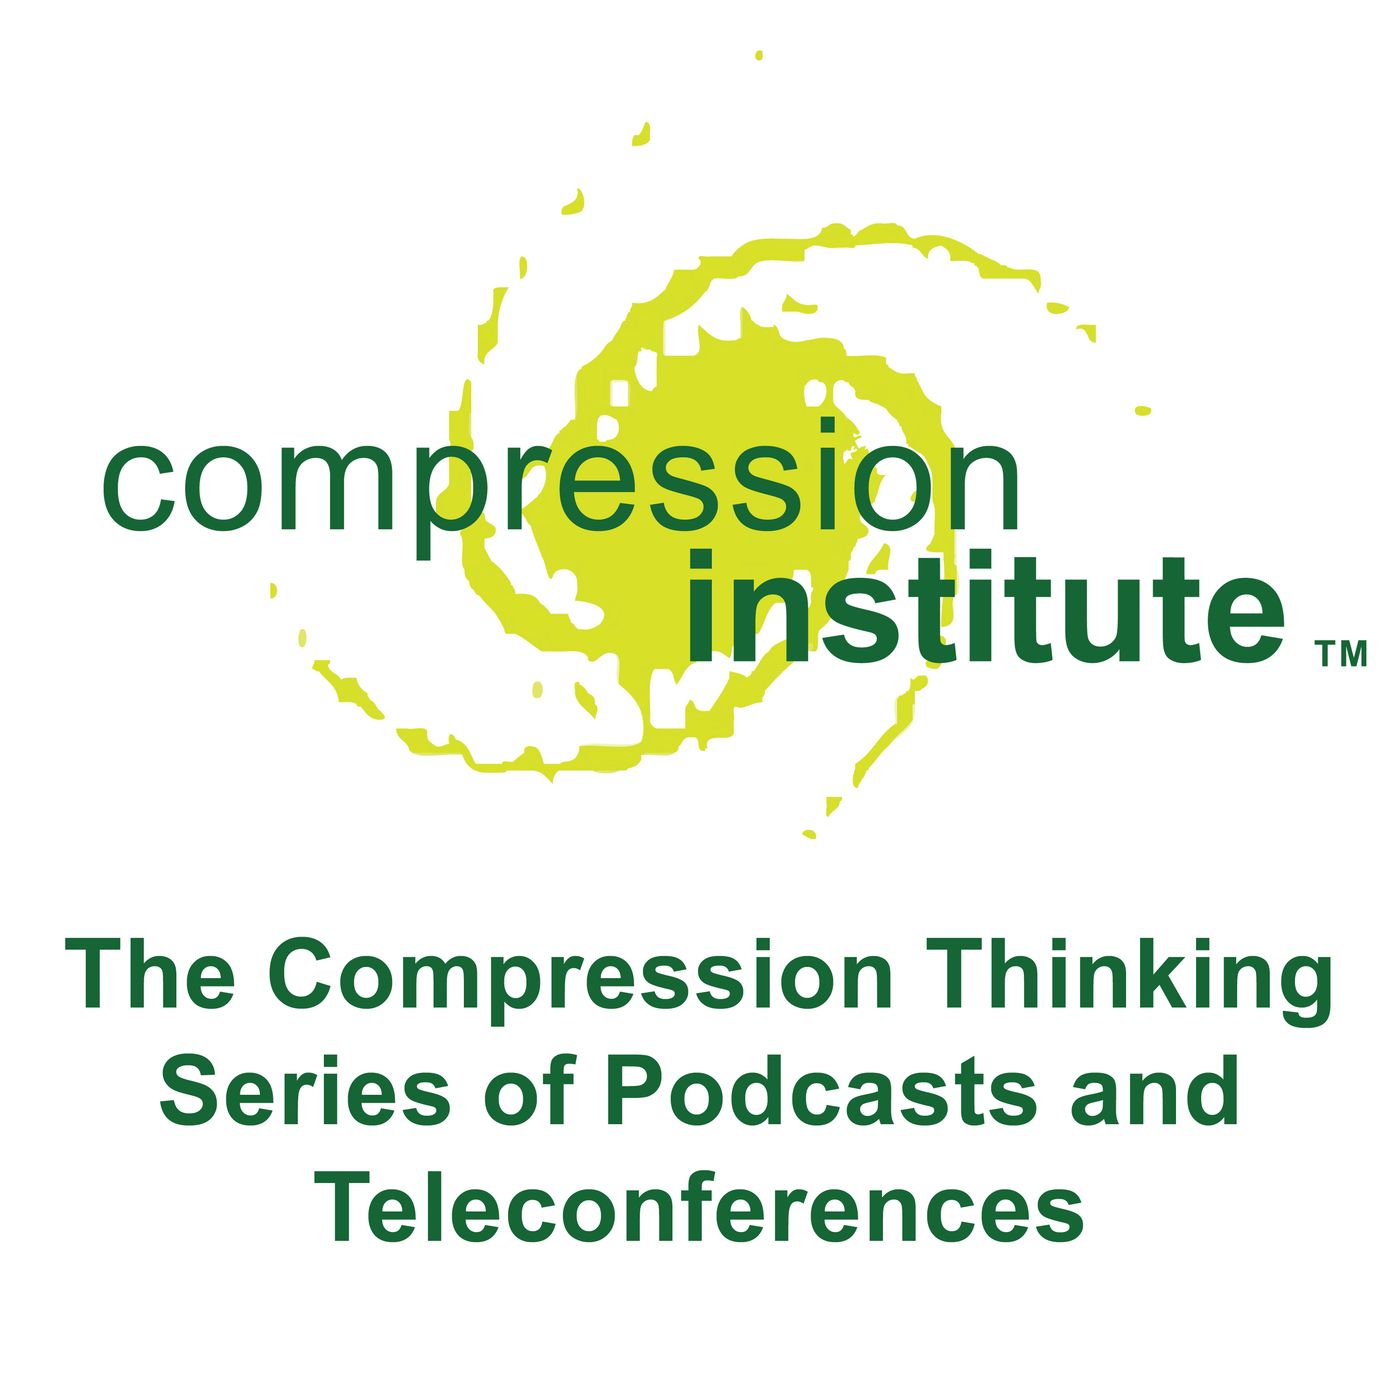 The Compression Thinking Series Podcasts